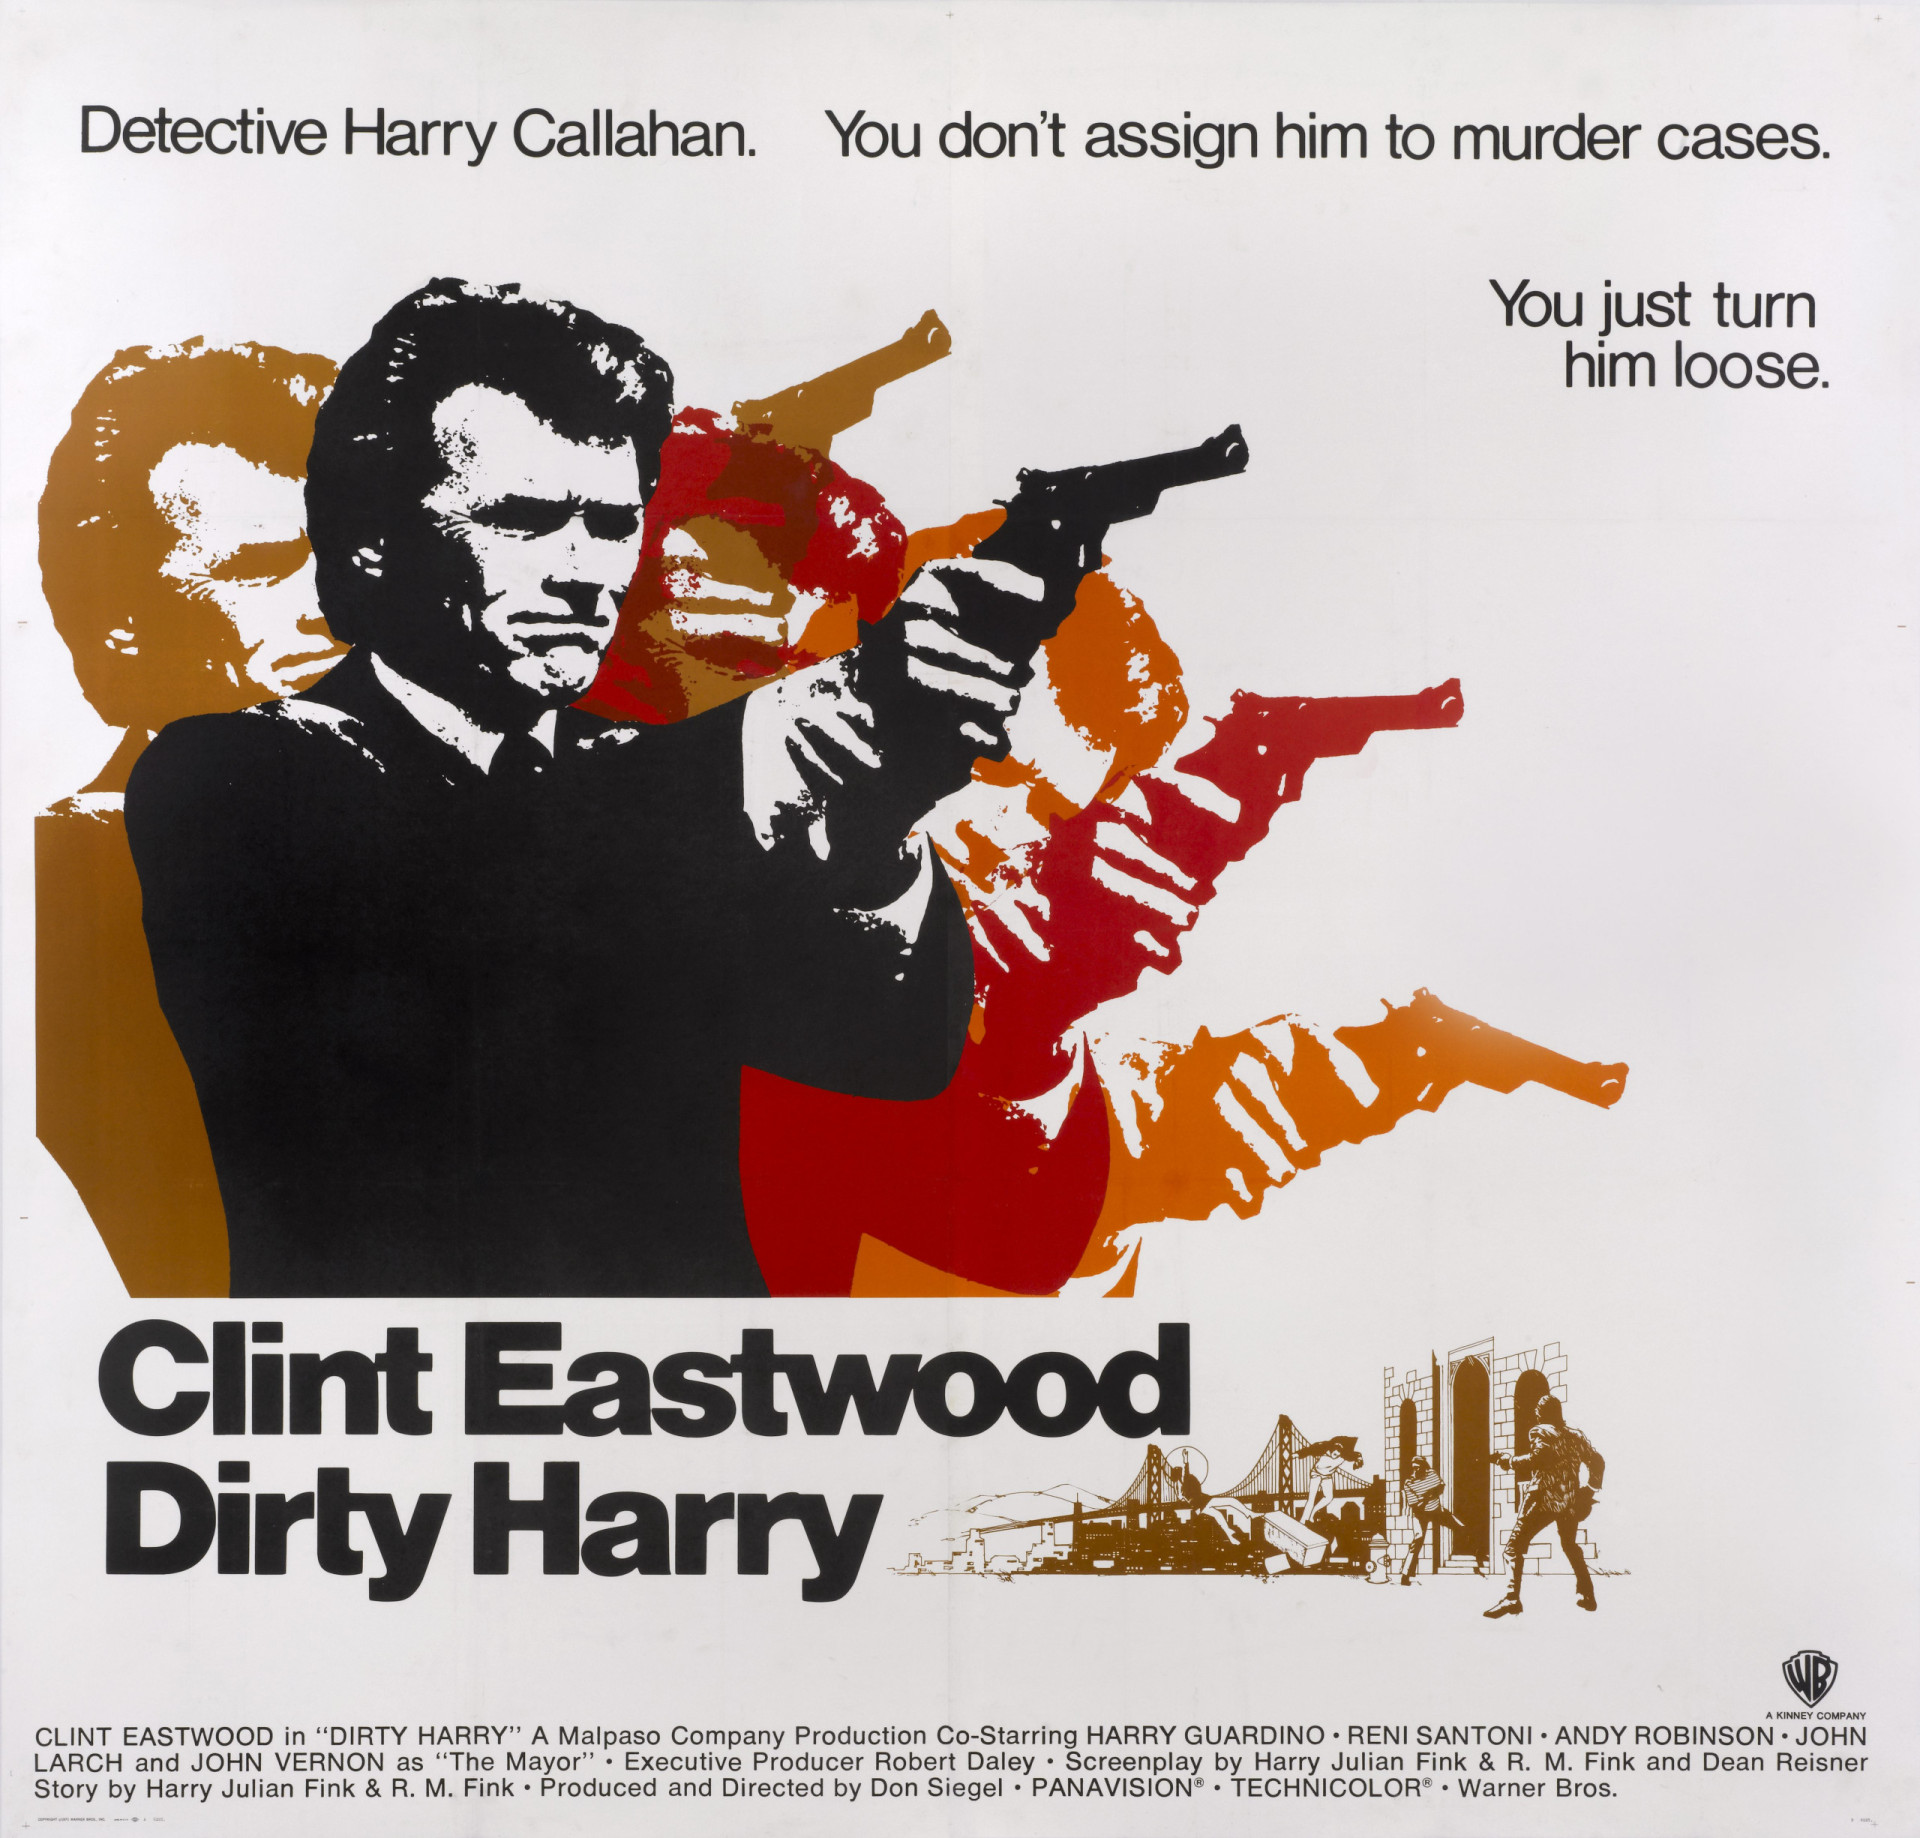 <p>"Detective Harry Callahan. You don't assign him to murder cases. You just turn him loose."</p>